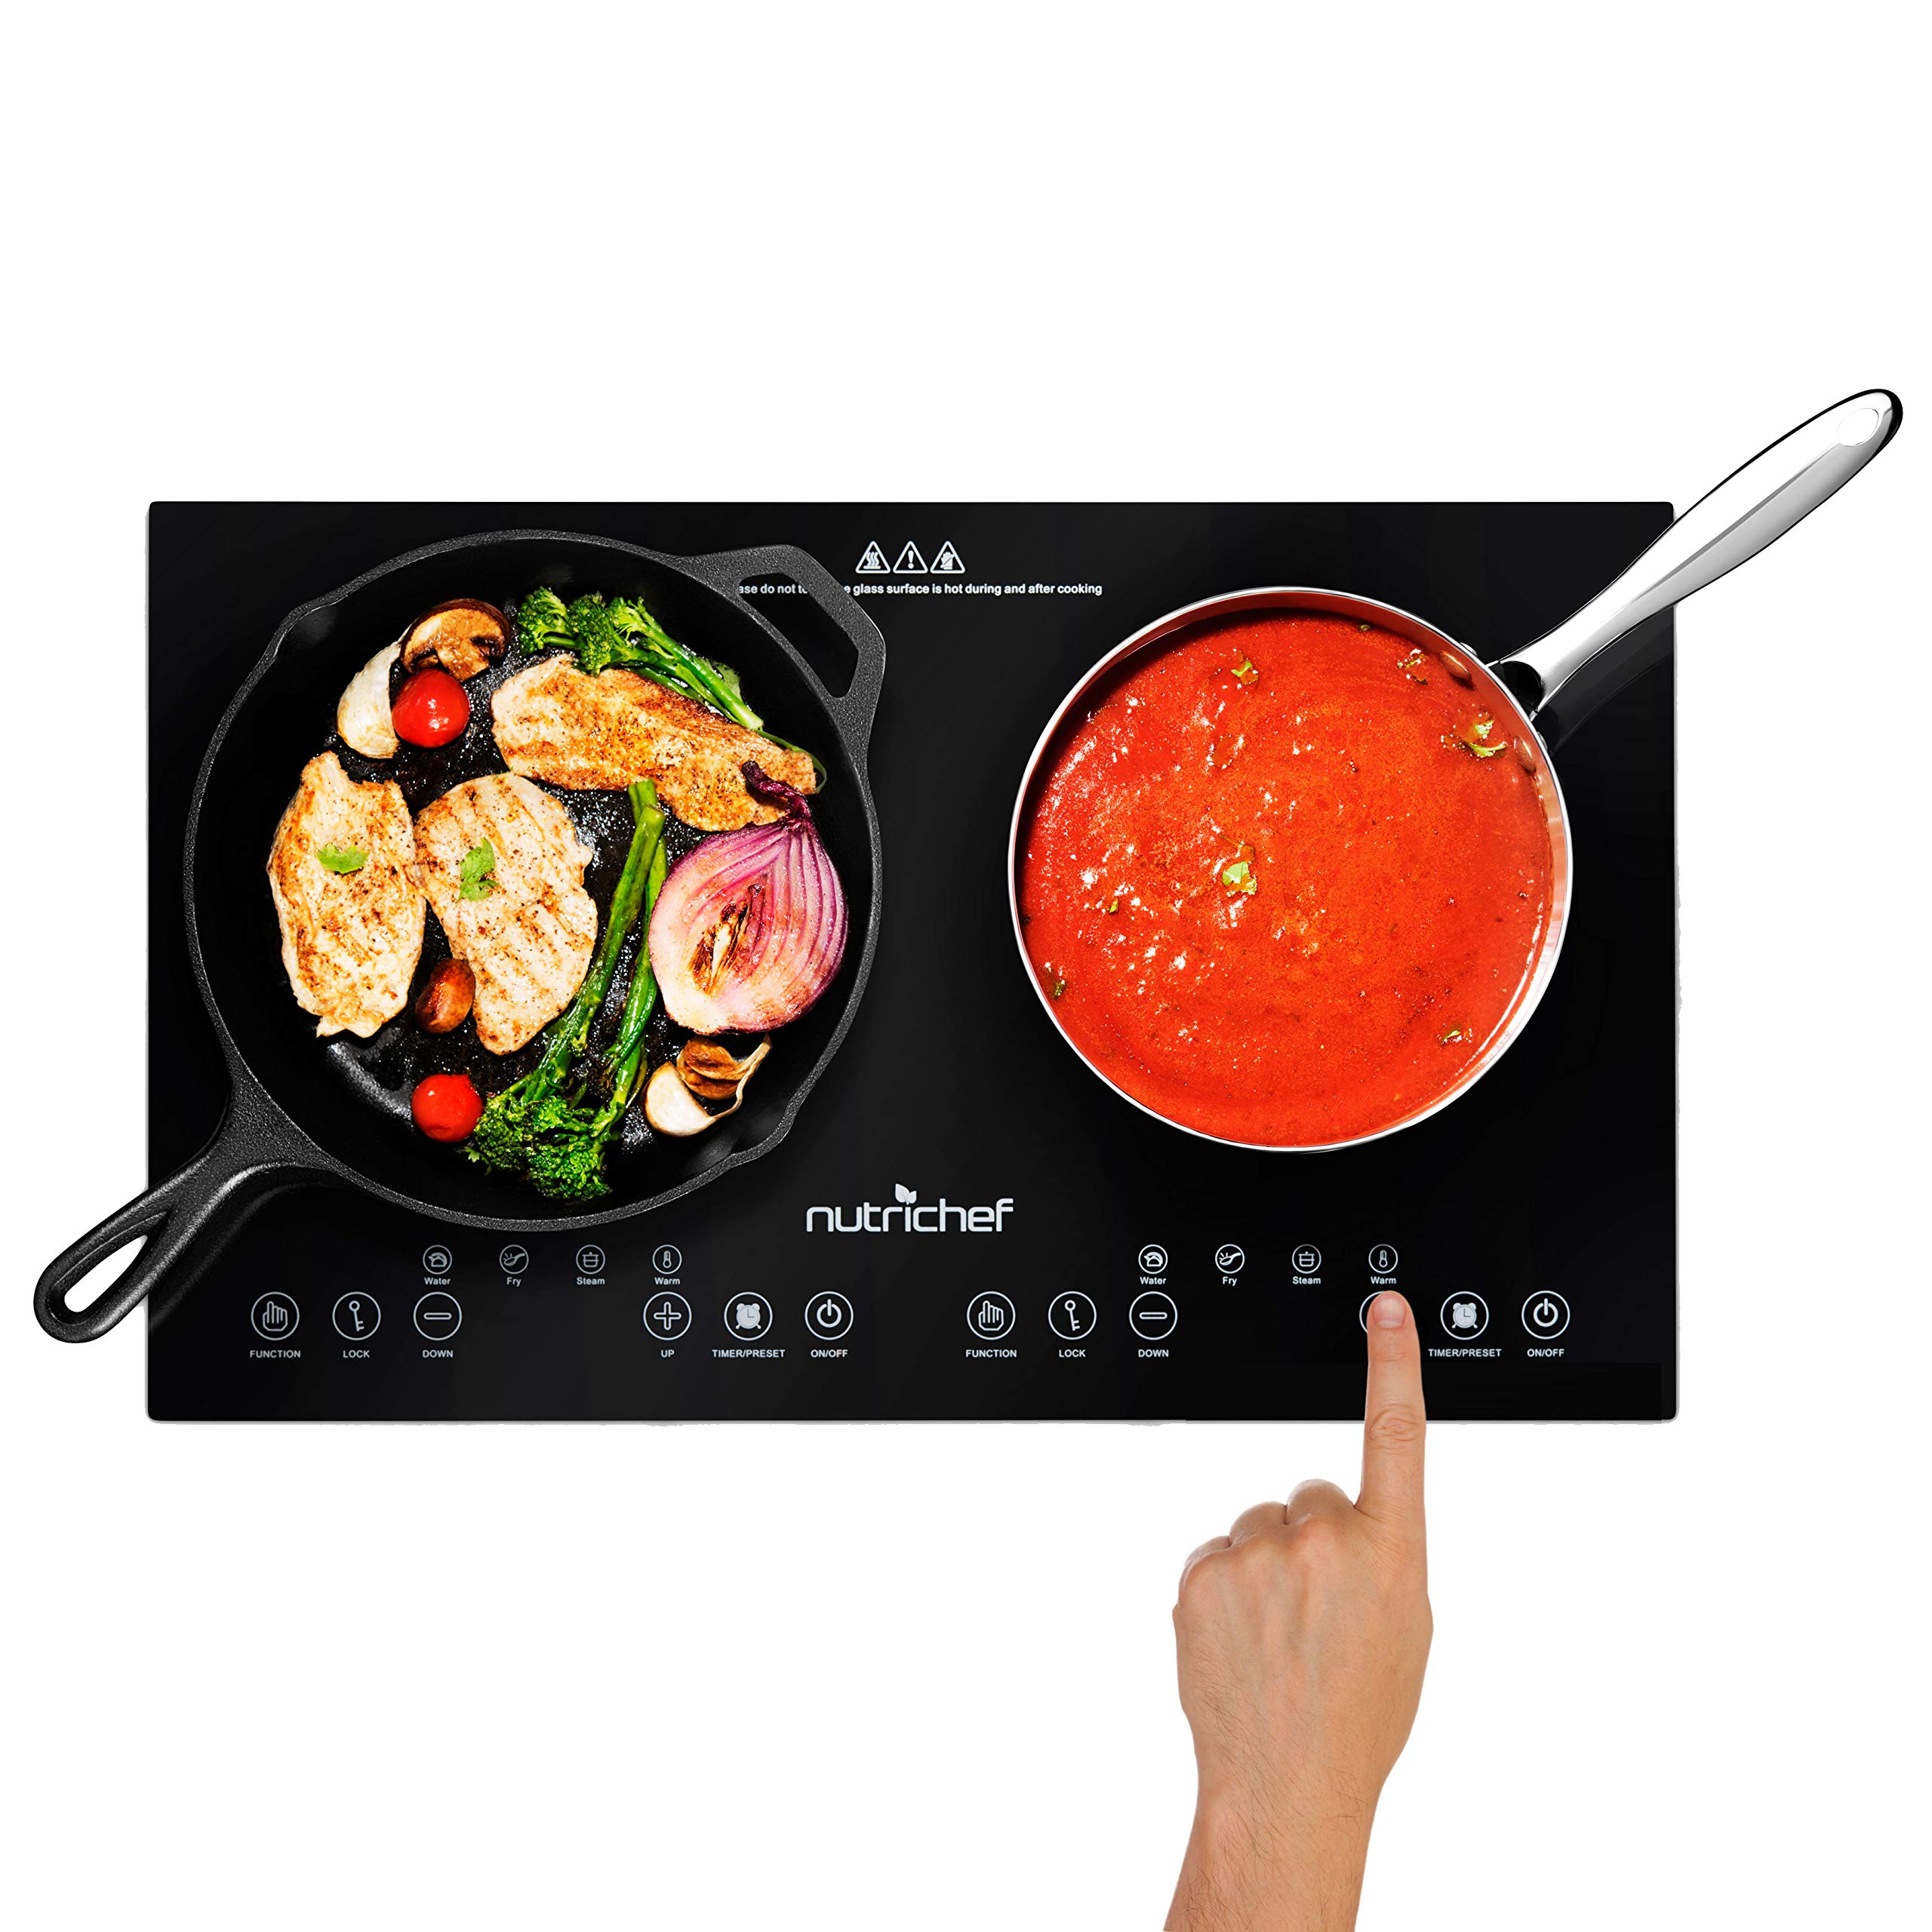 Book Cover NutriChef Double Induction Cooktop - Portable 120V Digital Ceramic Dual Burner w/ Kids Safety Lock - Works with Flat Cast Iron Pan,1800 Watt,Touch Sensor Control, 12 Controls - NutriChef PKSTIND48